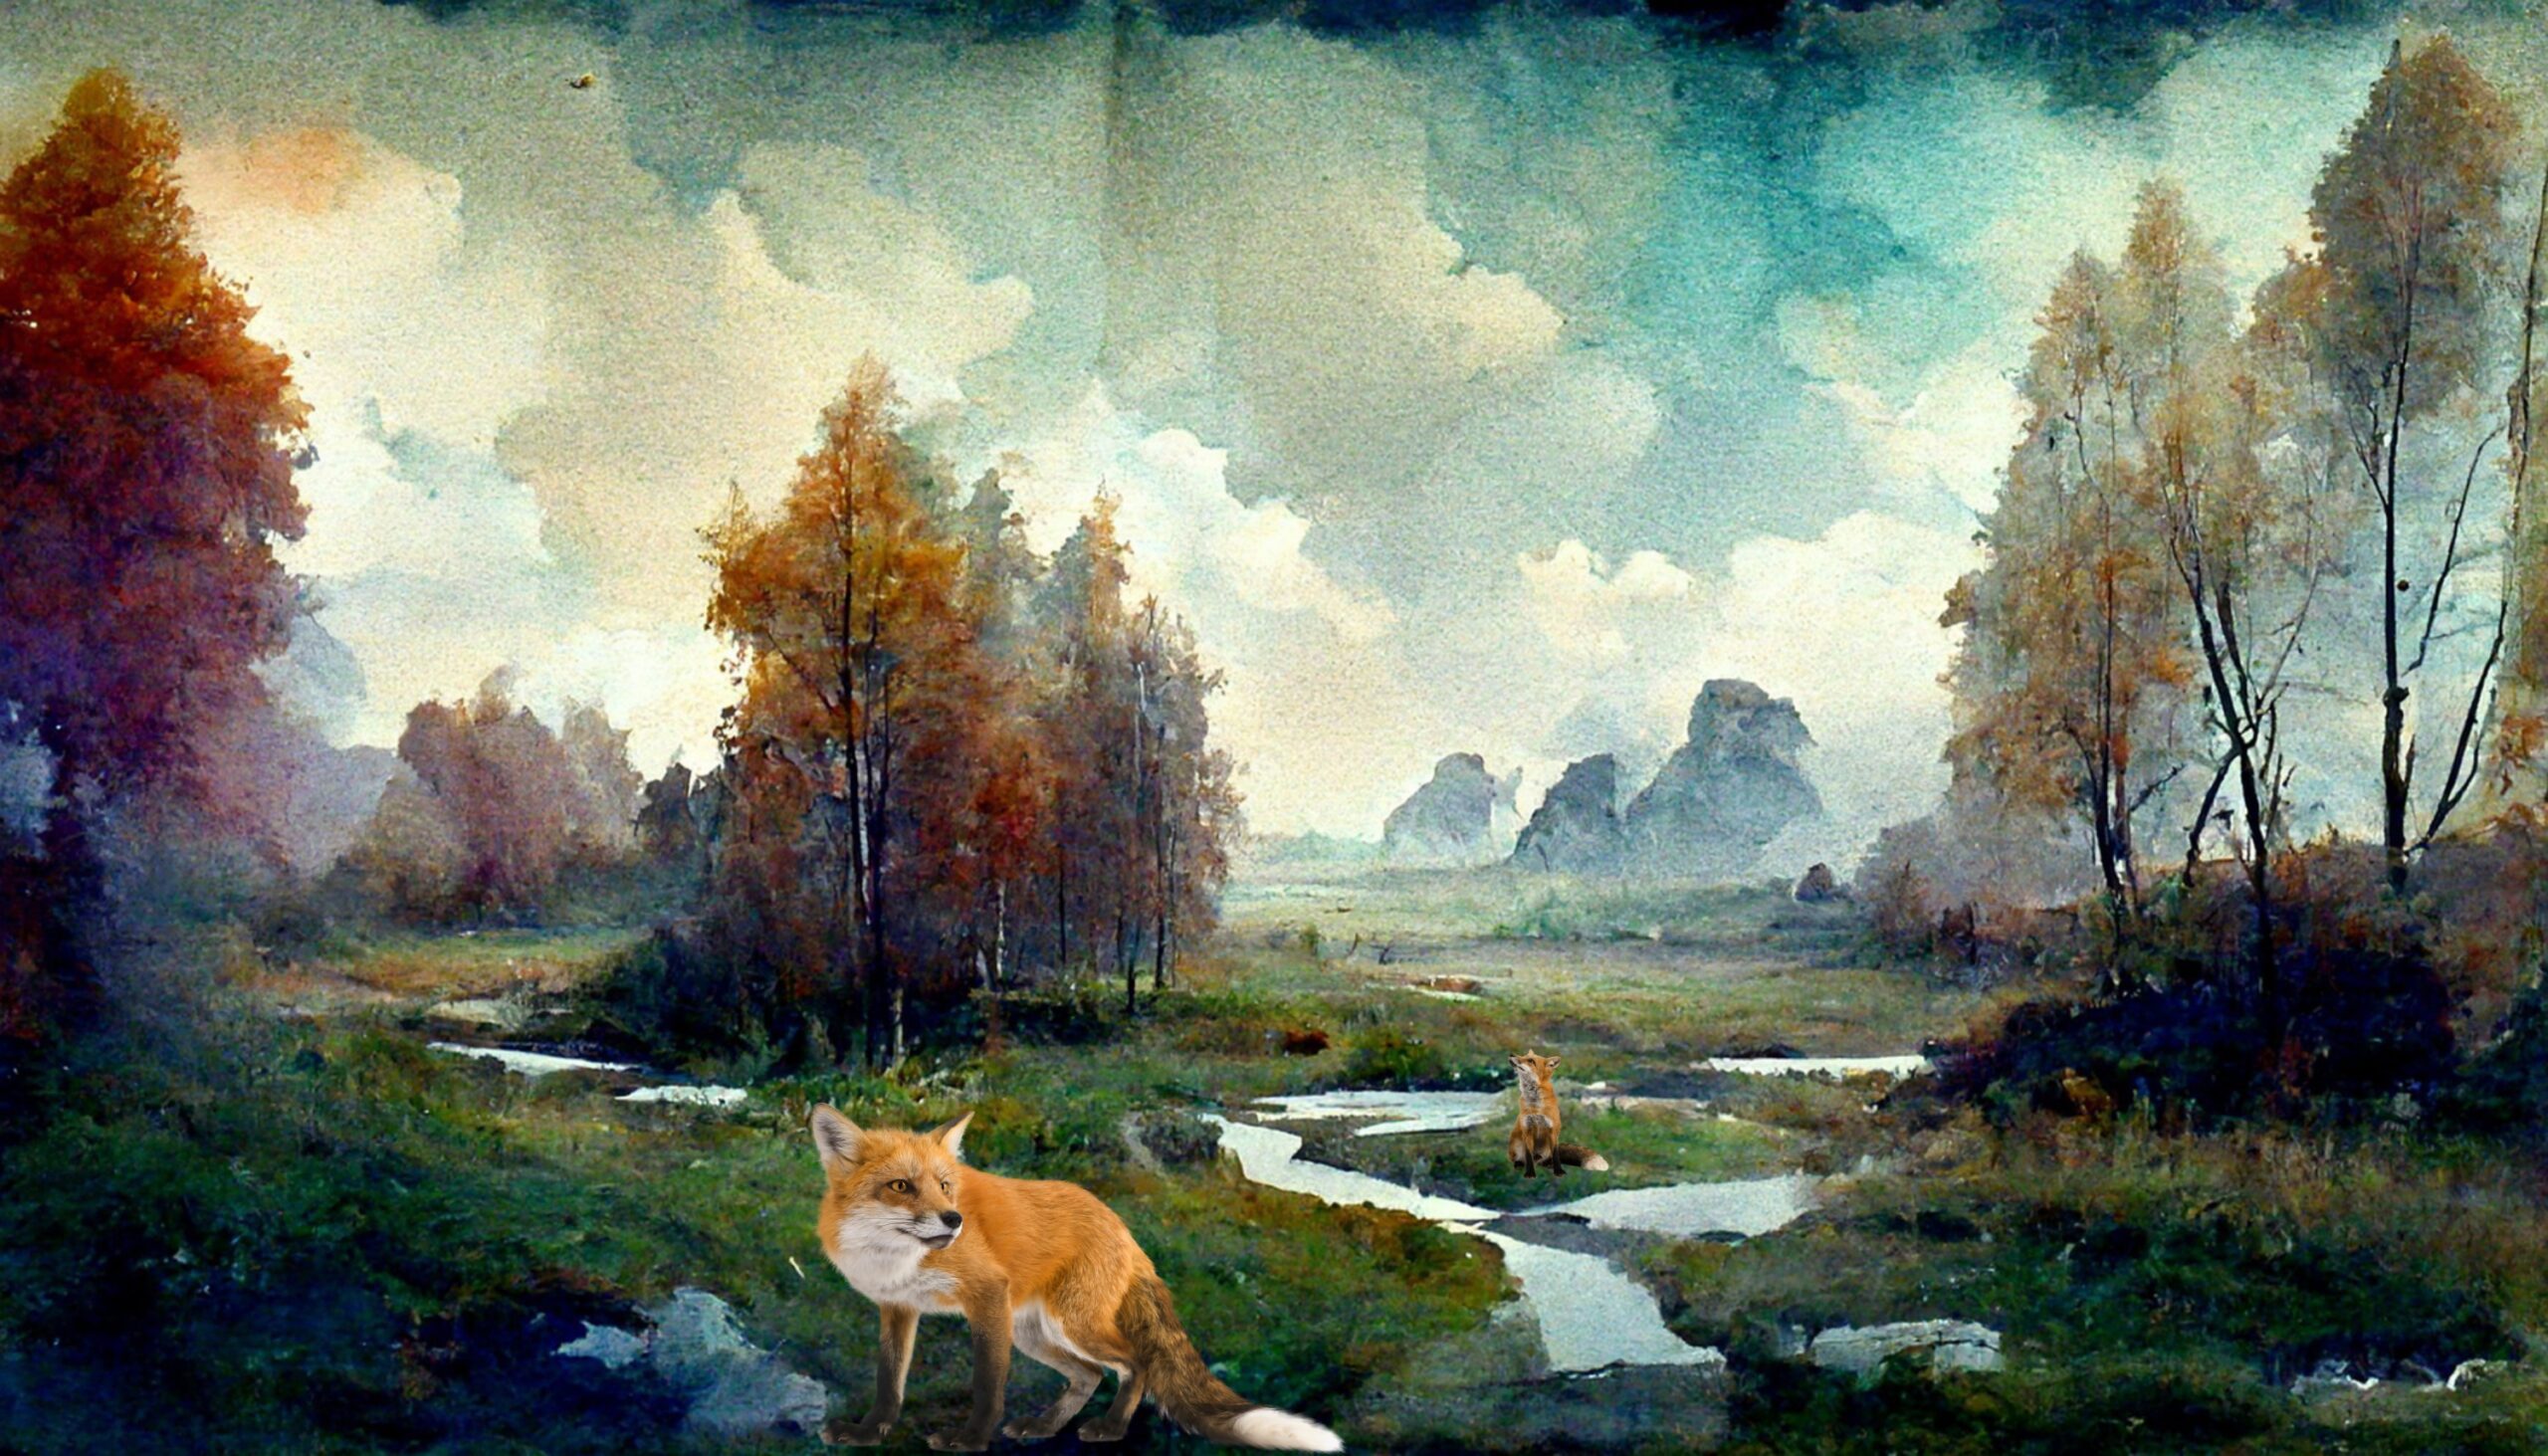 watercolor image of river flowing through forest, fall trees, 2 foxes